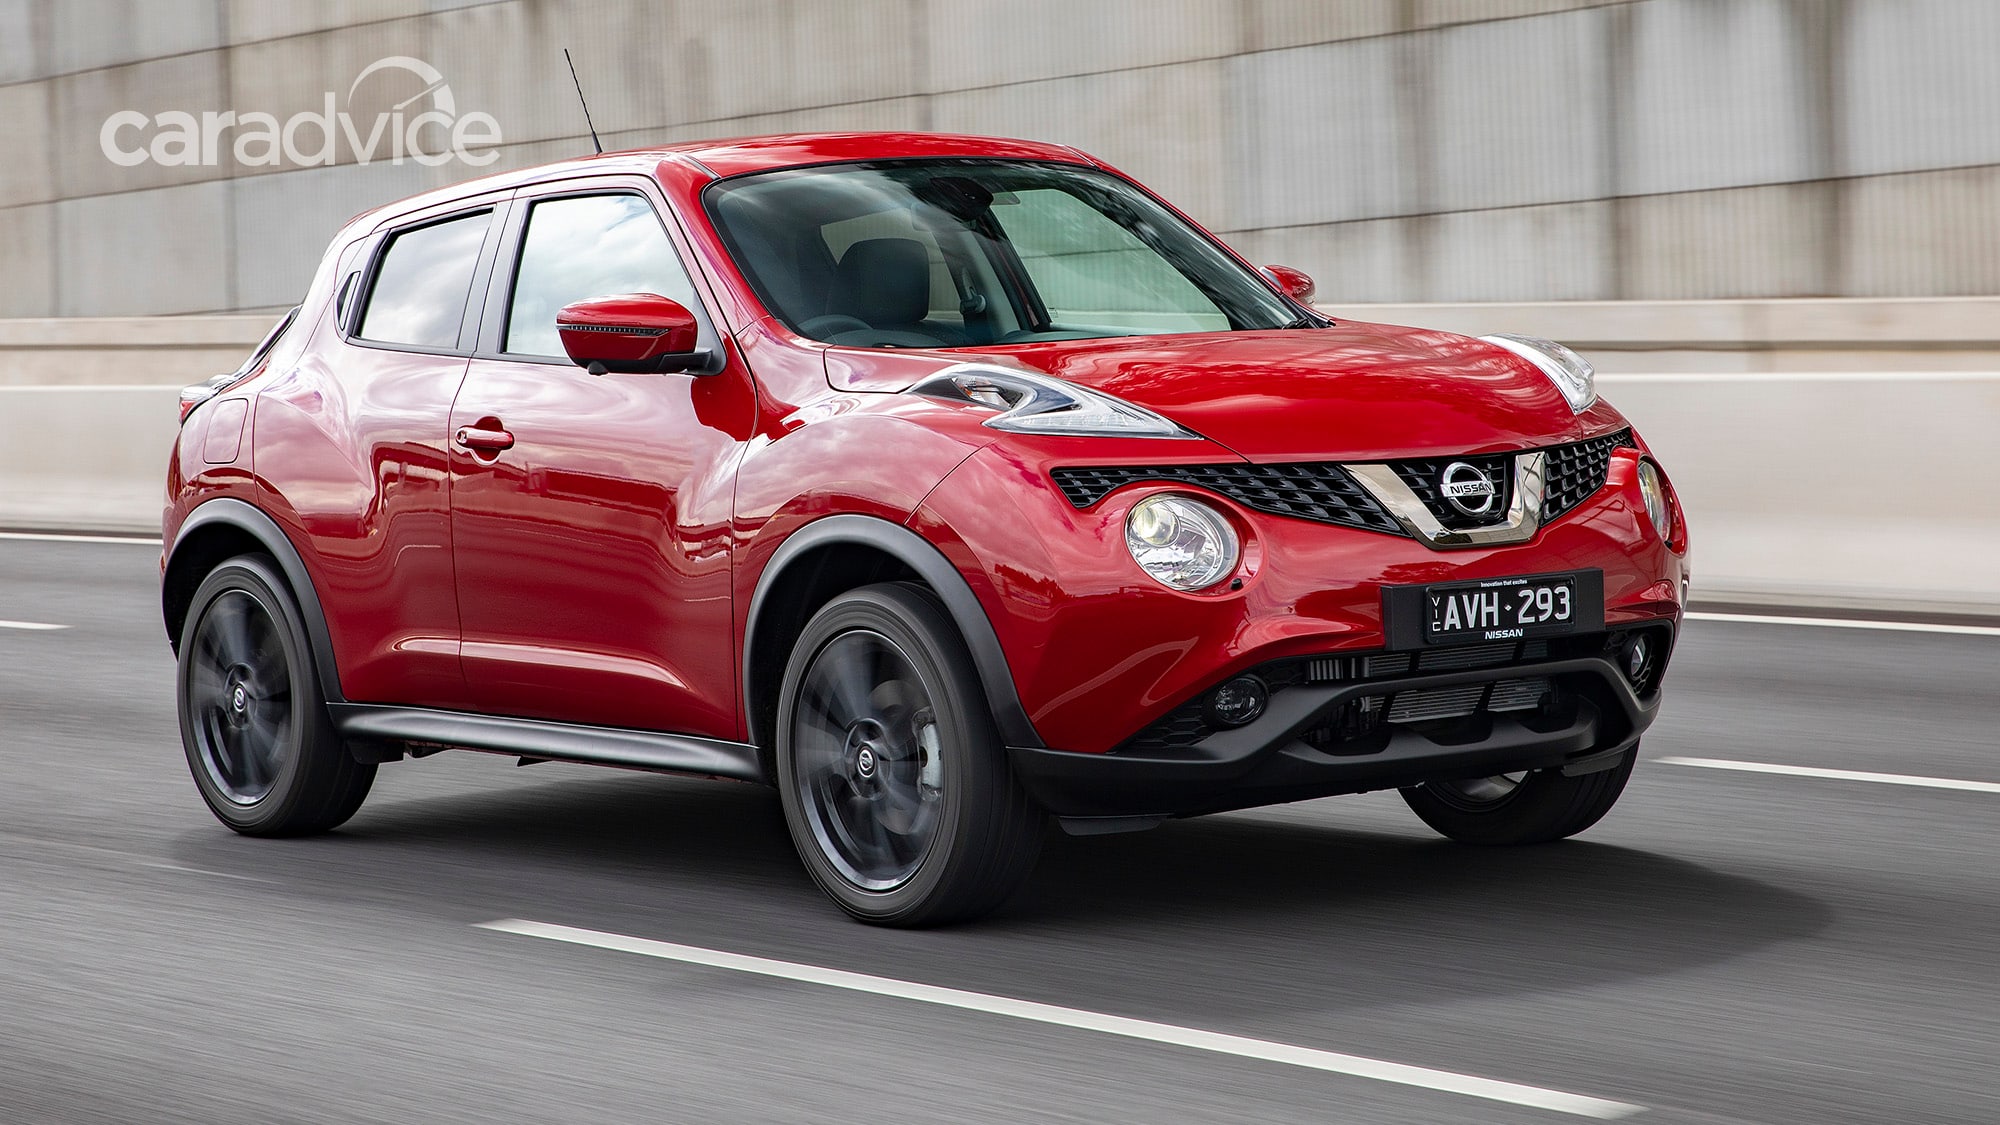 2019 Nissan Juke pricing and specs | CarAdvice